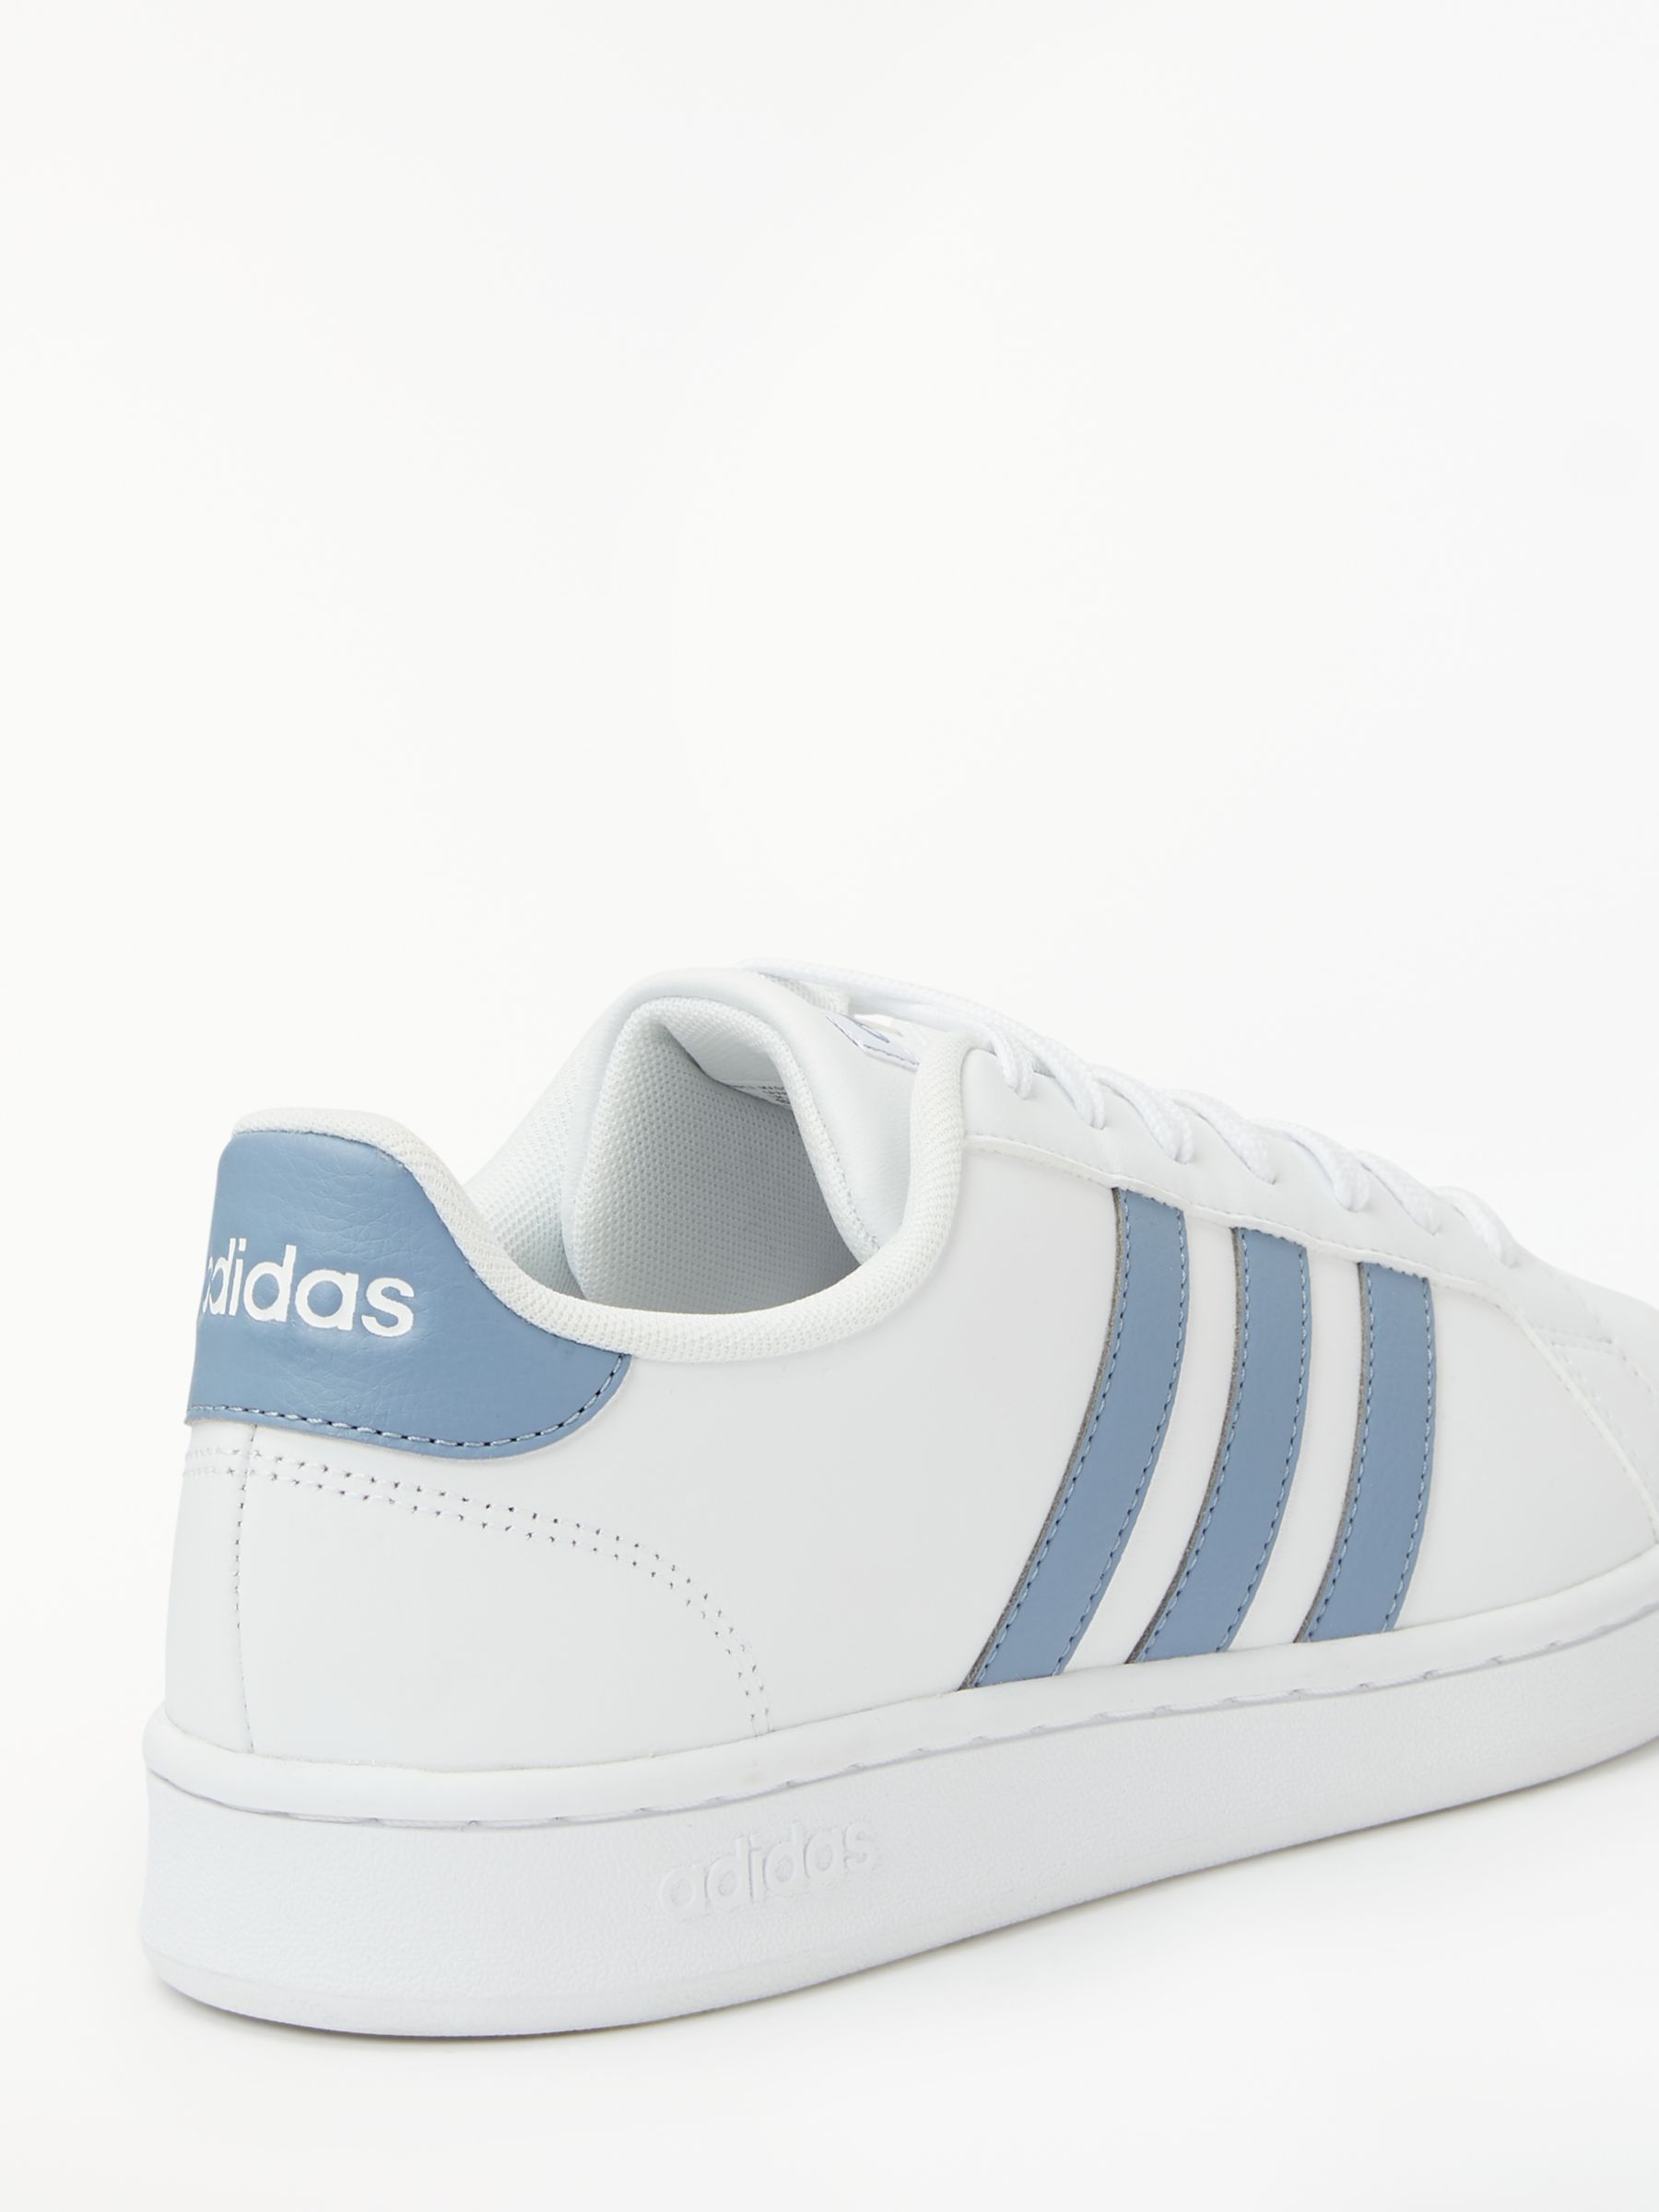 adidas Grand Court Men #39 s Trainers FTWR White/Raw Grey